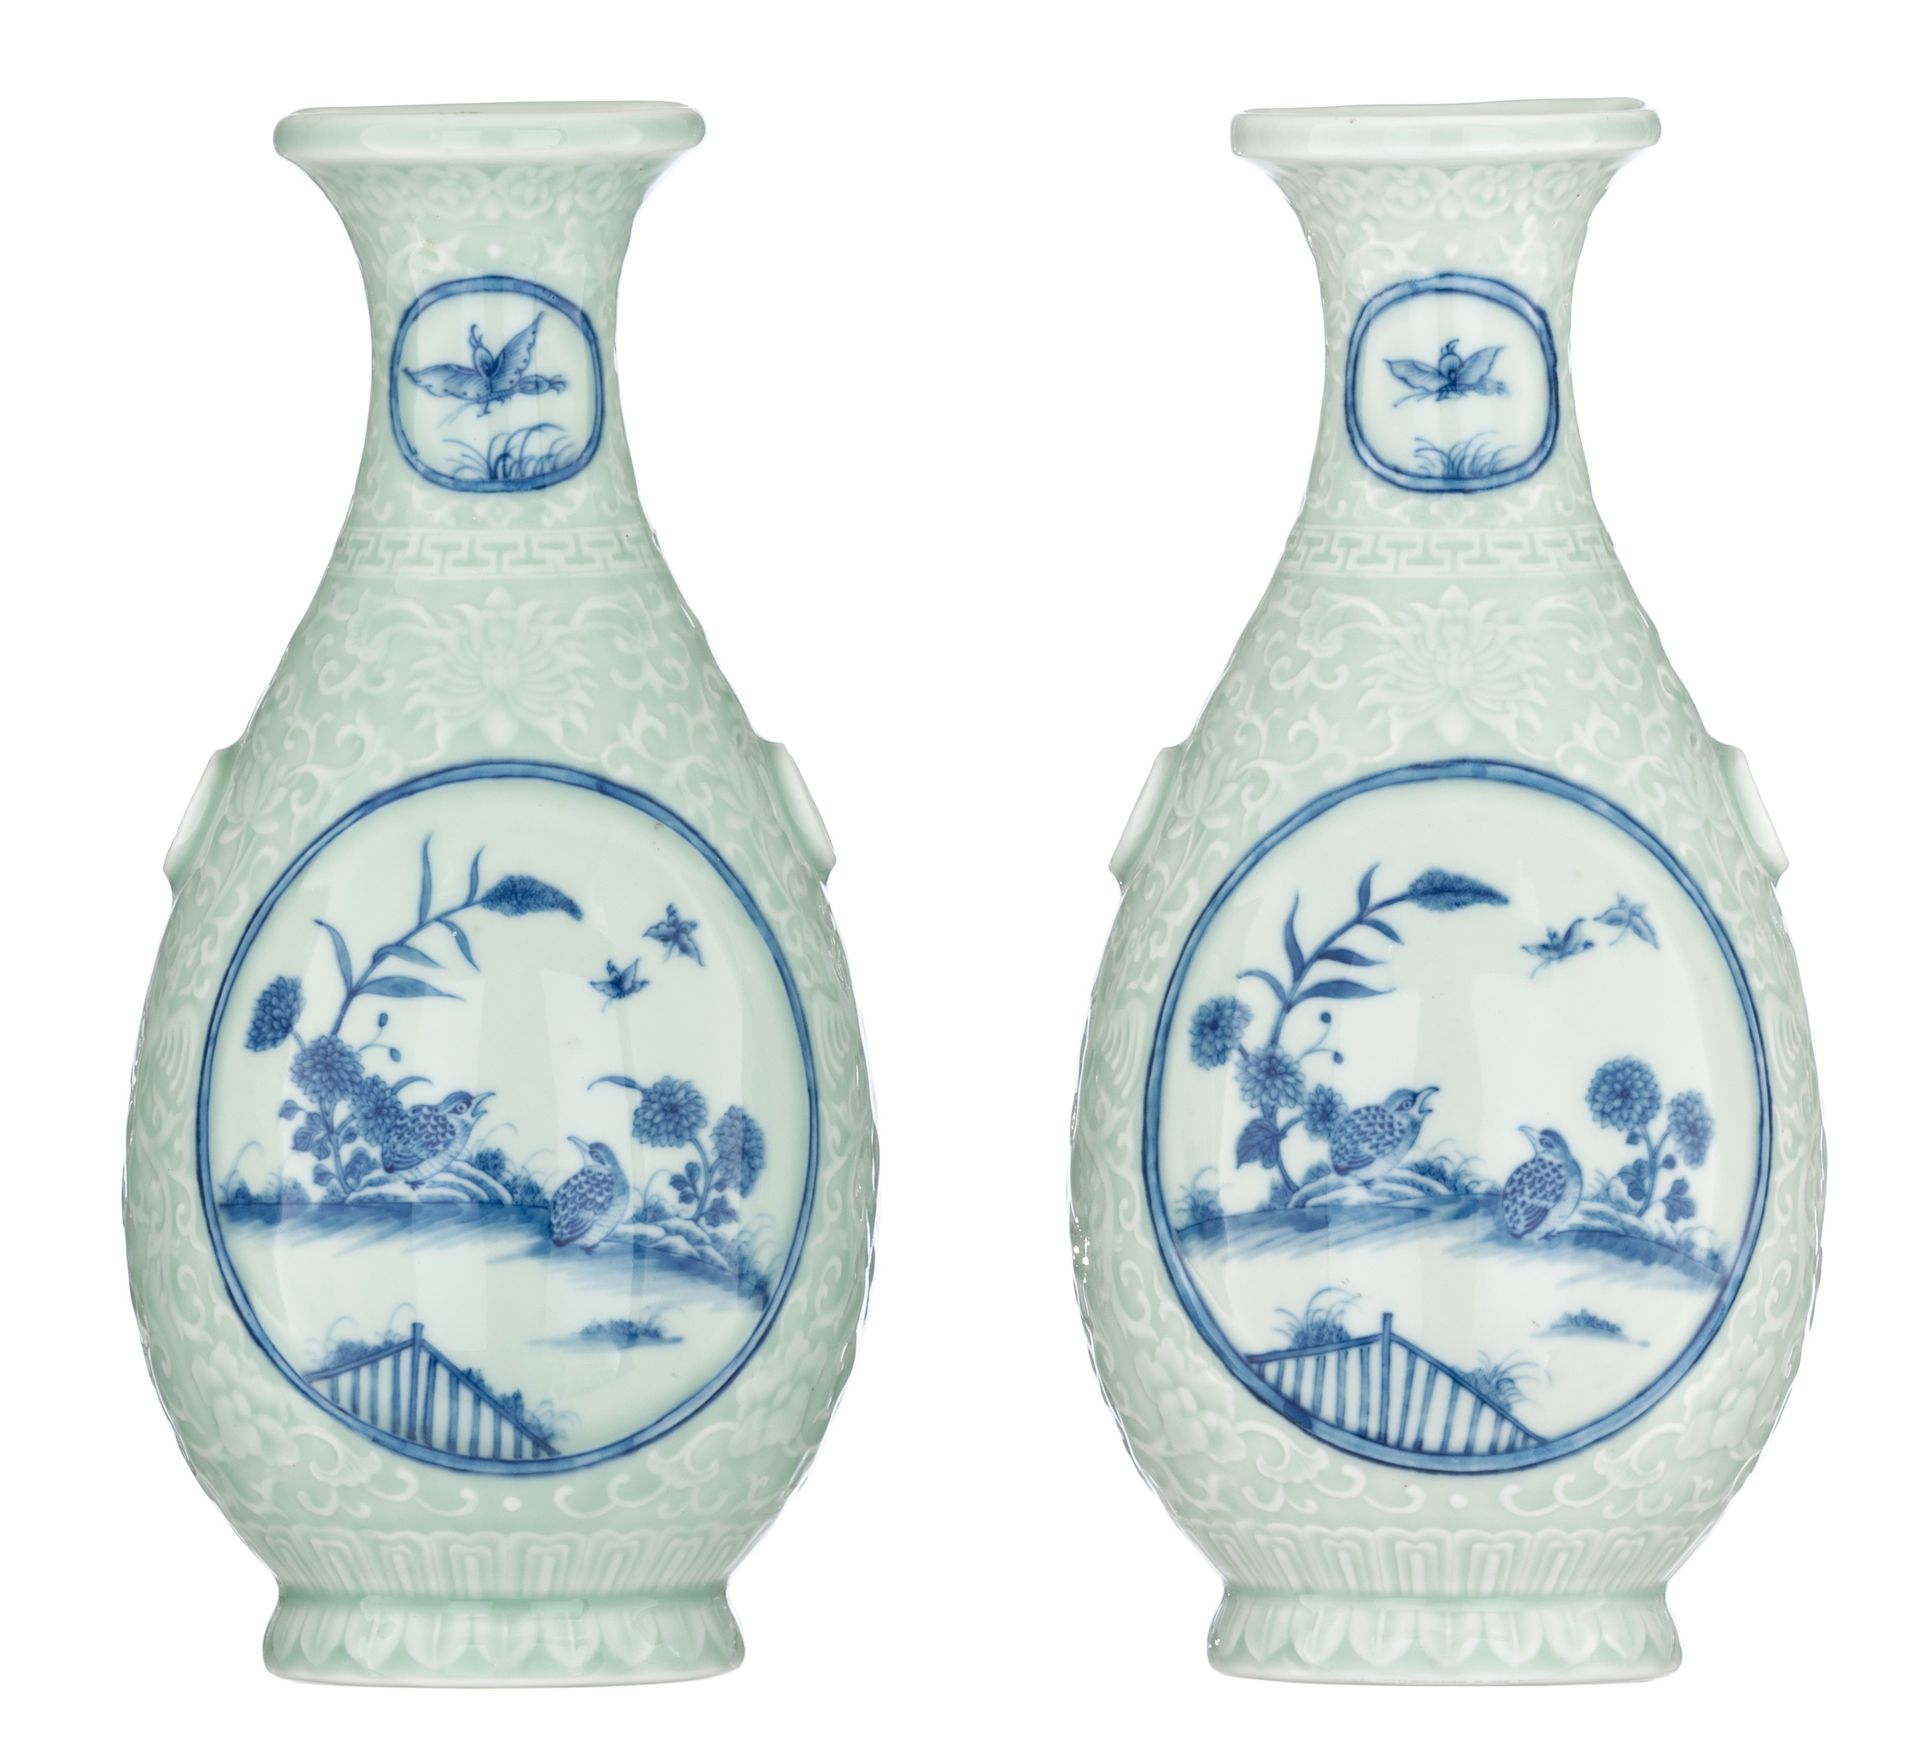 Two nearly identical celadon ground 'Quails' wall vases, with a Daoguang mark, R&hellip;